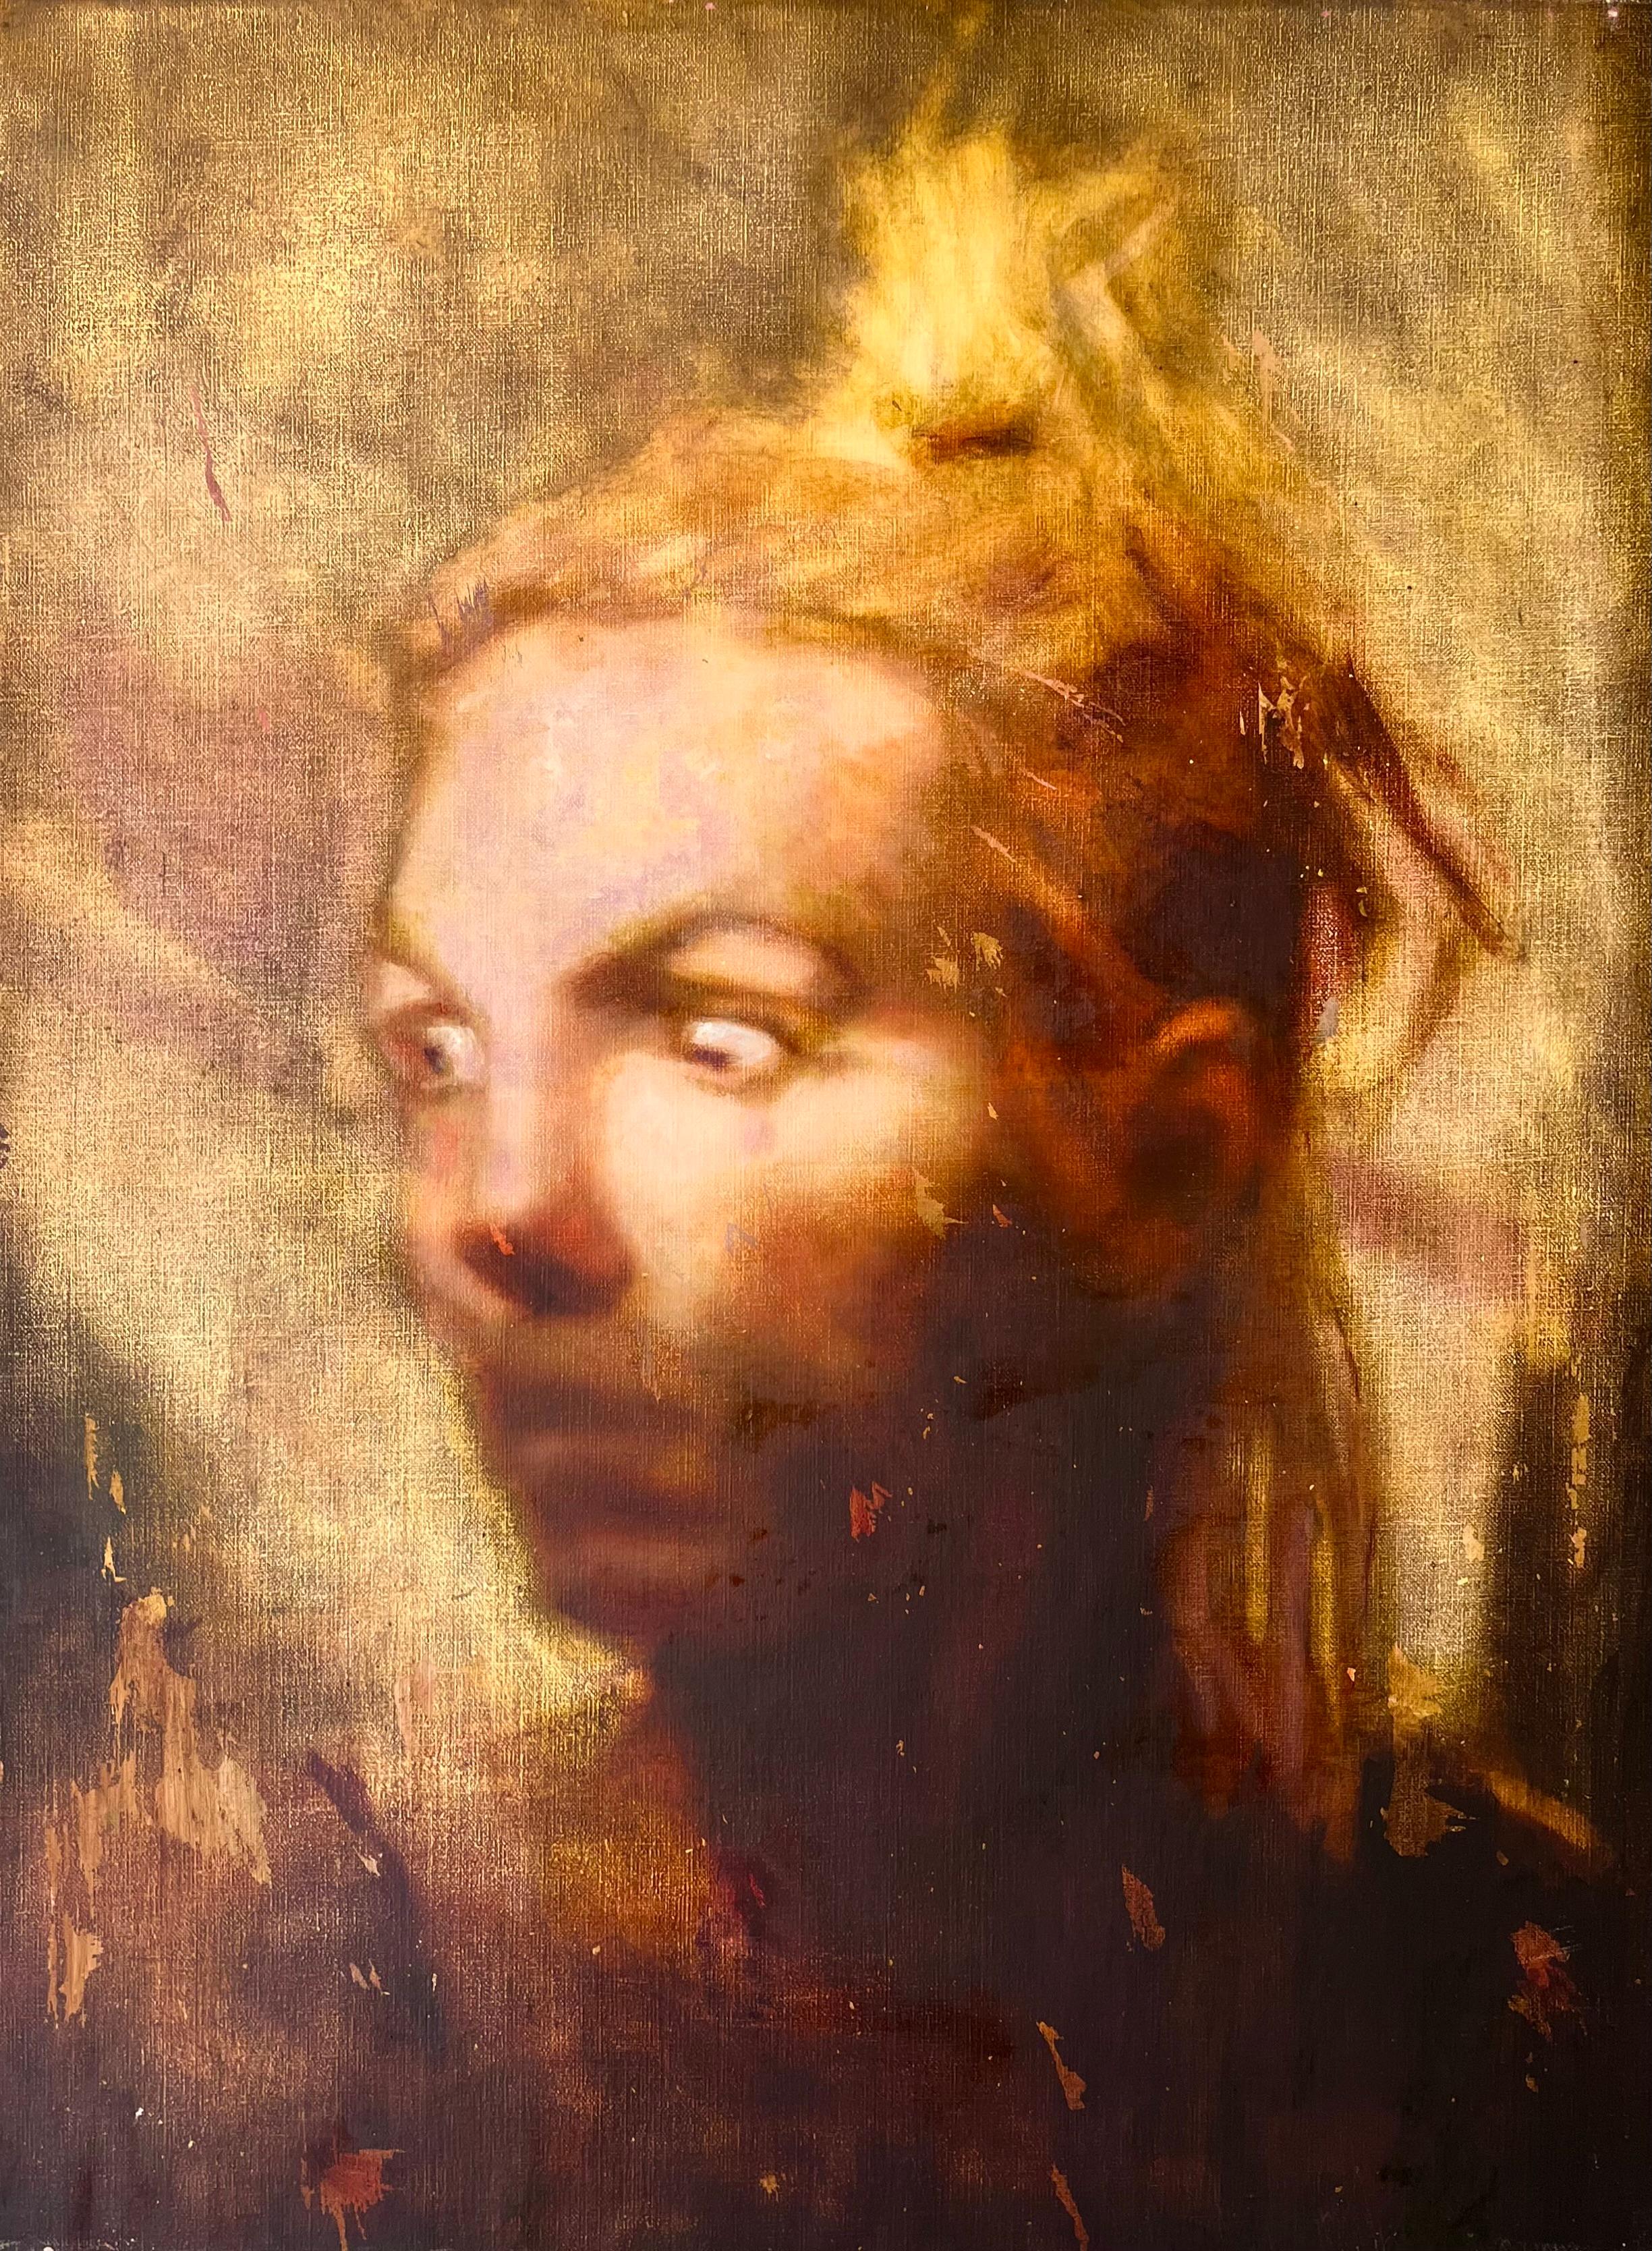 Alfonso Gosalbez Berenguer Figurative Painting - Modern Oil on Canvas Abstract Figurative Portrait on Gestural Yellow & Brown 